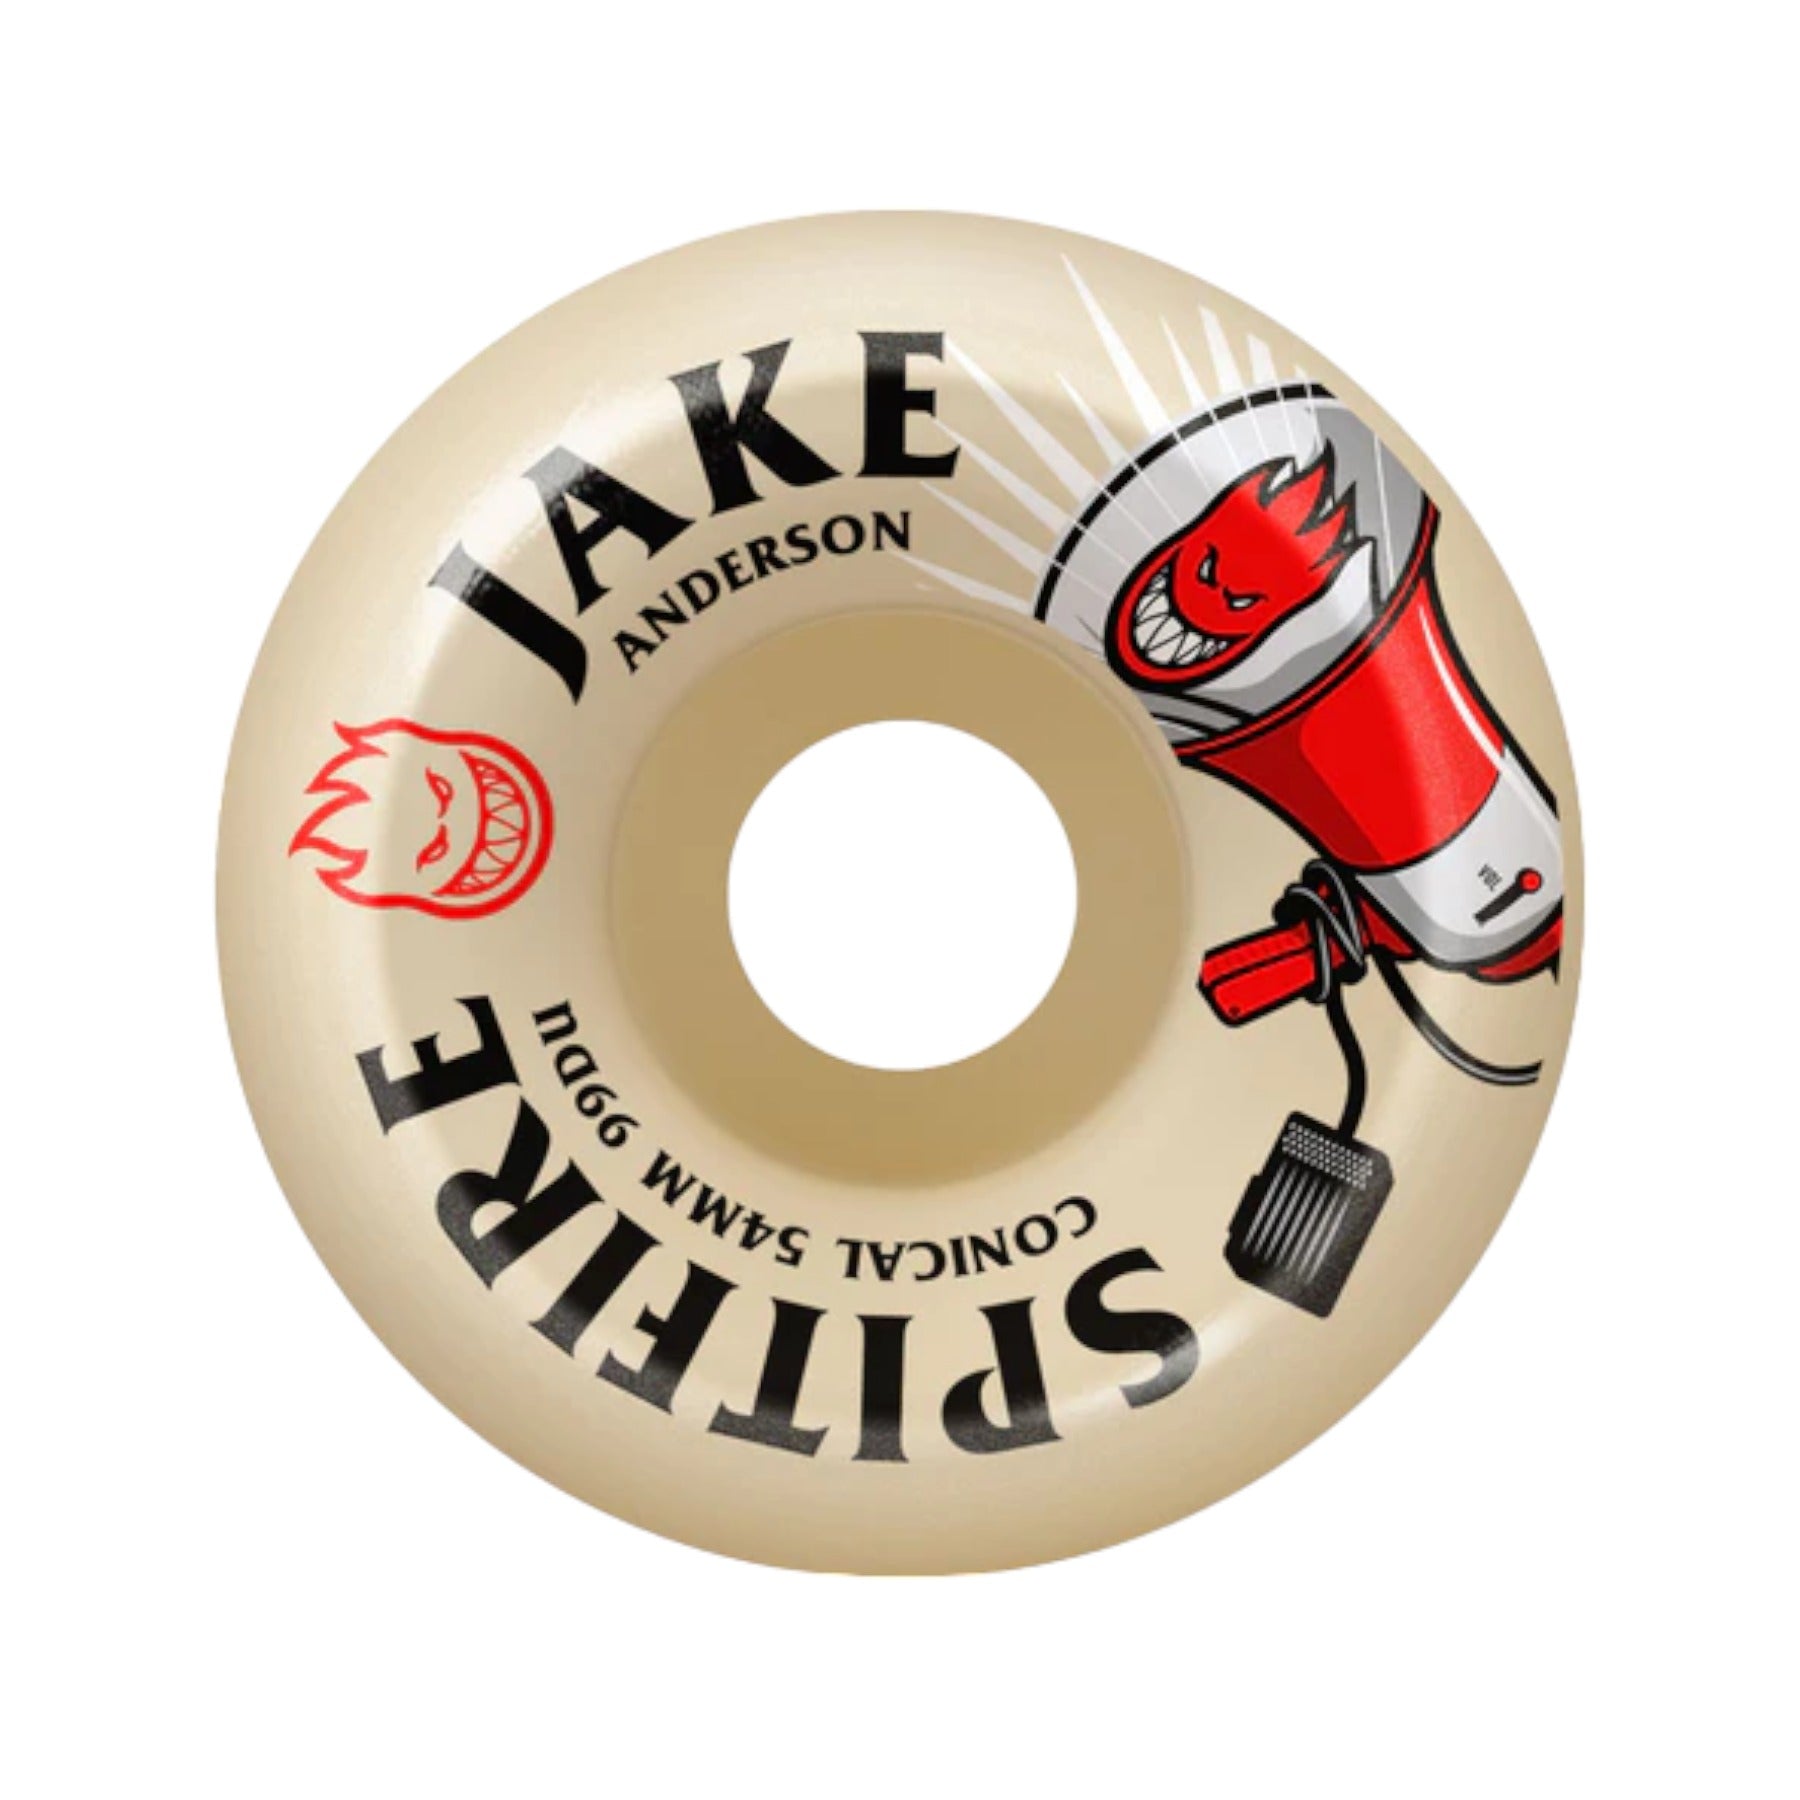 Spitfire Formula Four Jake Anderson Conical 99a Wheel